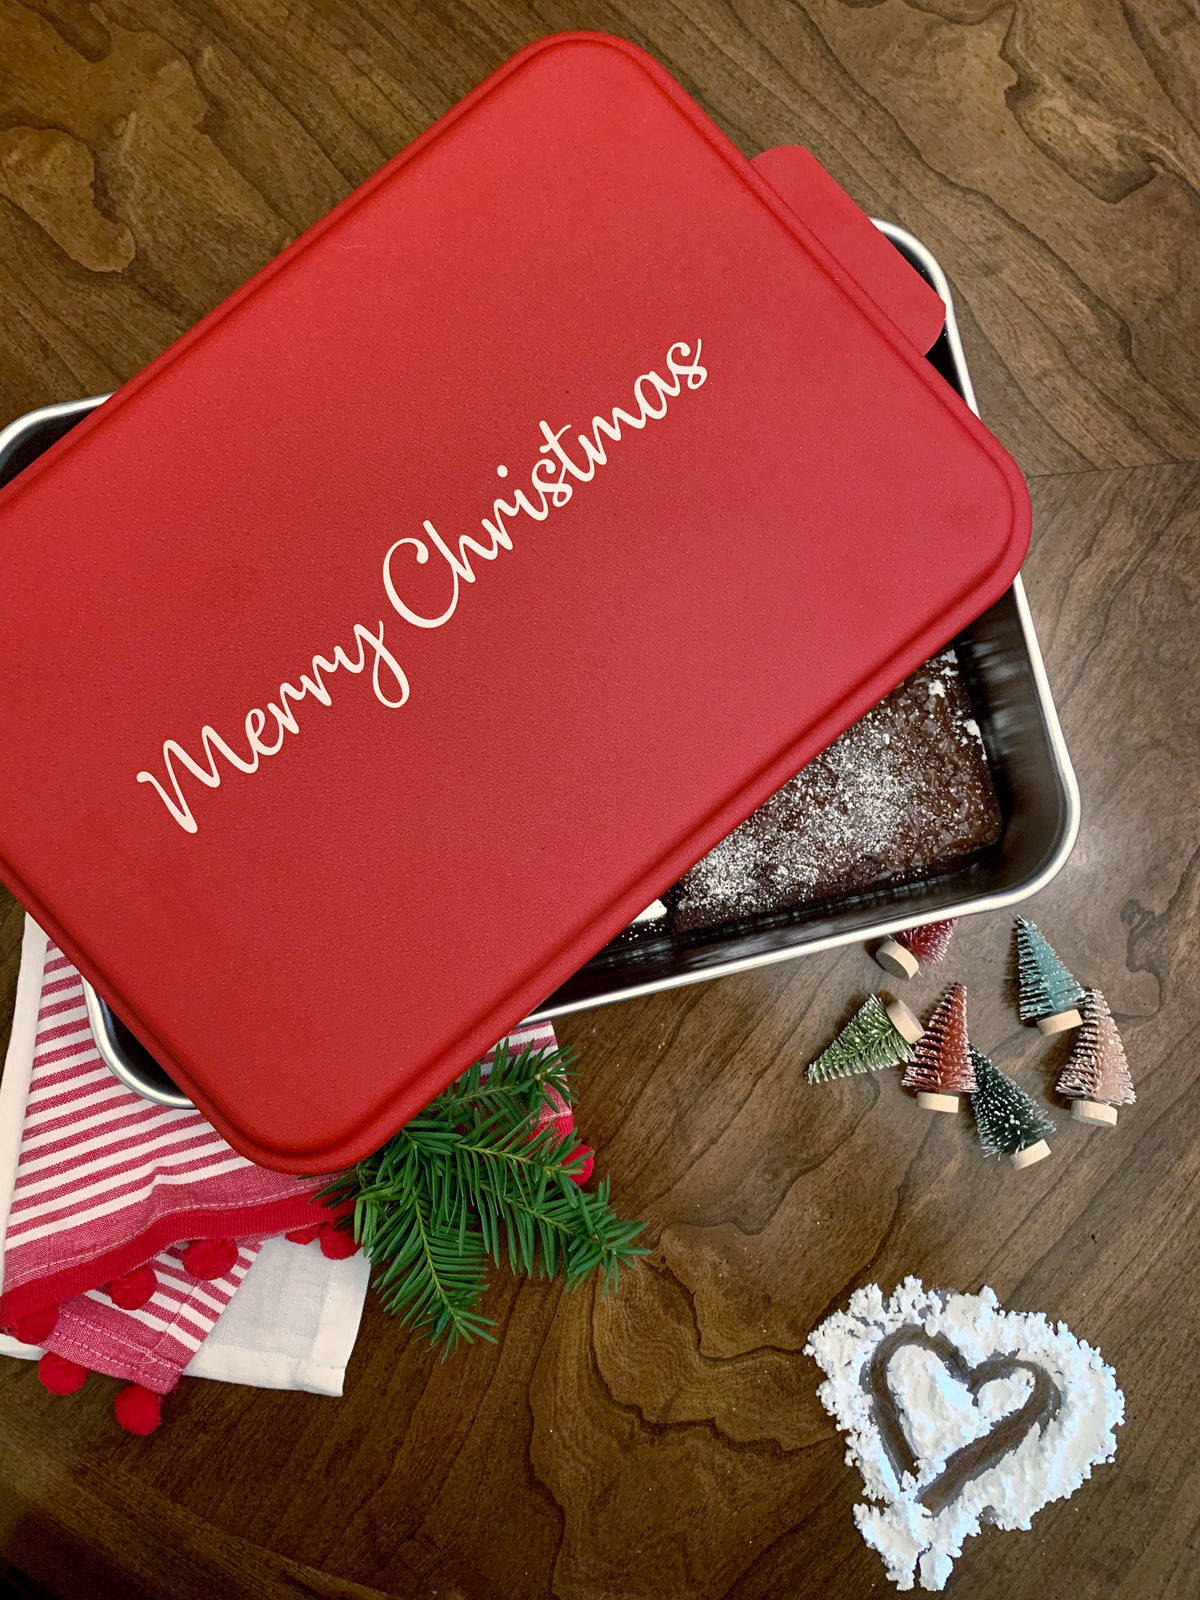 9&quot; x 13&quot; Aluminum Cake Pan with Red Lid - Merry Christmas - ImpressMeGifts